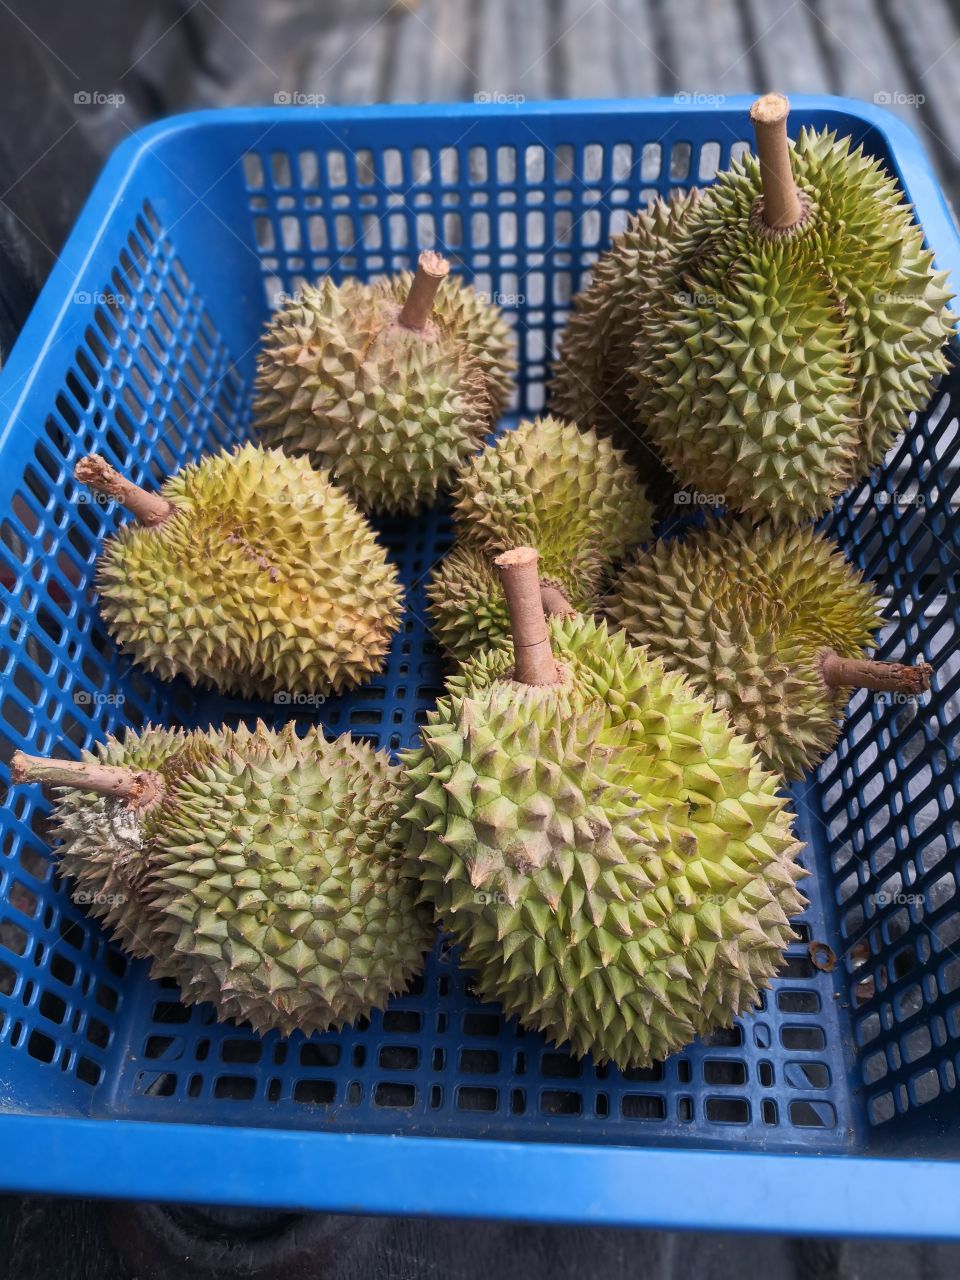 King of fruit... Durian... Yummy... Some said smelly.. We said delicious..